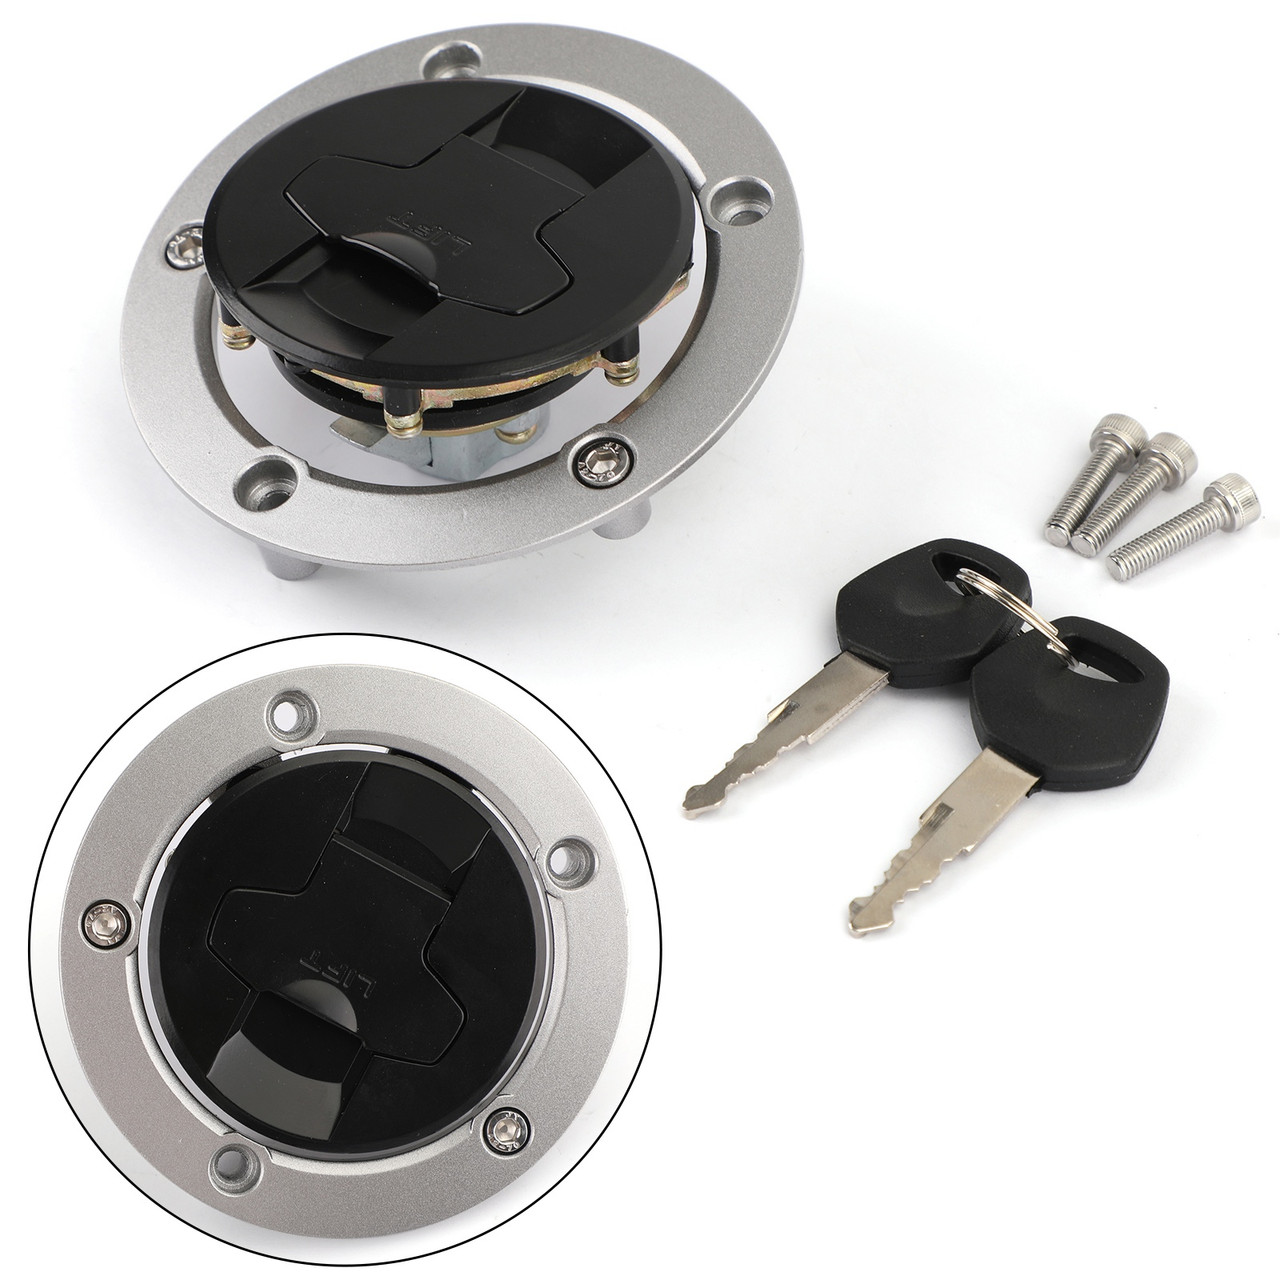 Fuel Gas Tank Cap Cover With Keys Fit for Suzuki DL650 V-STROM XT ABS GSX-S750 1000R ABS L7-L9 17-20